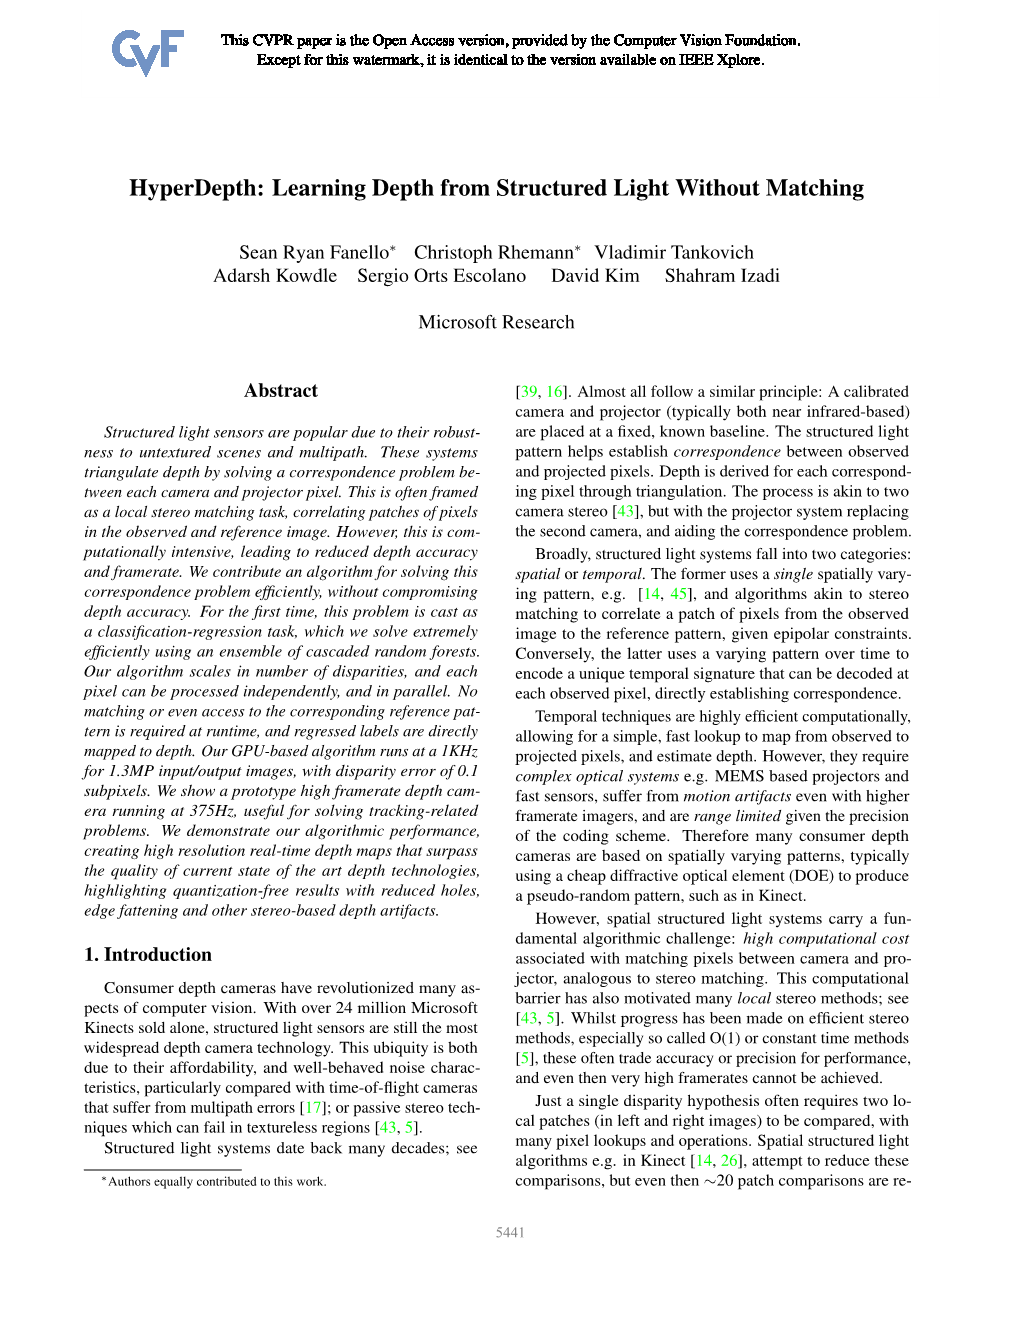 Hyperdepth: Learning Depth from Structured Light Without Matching